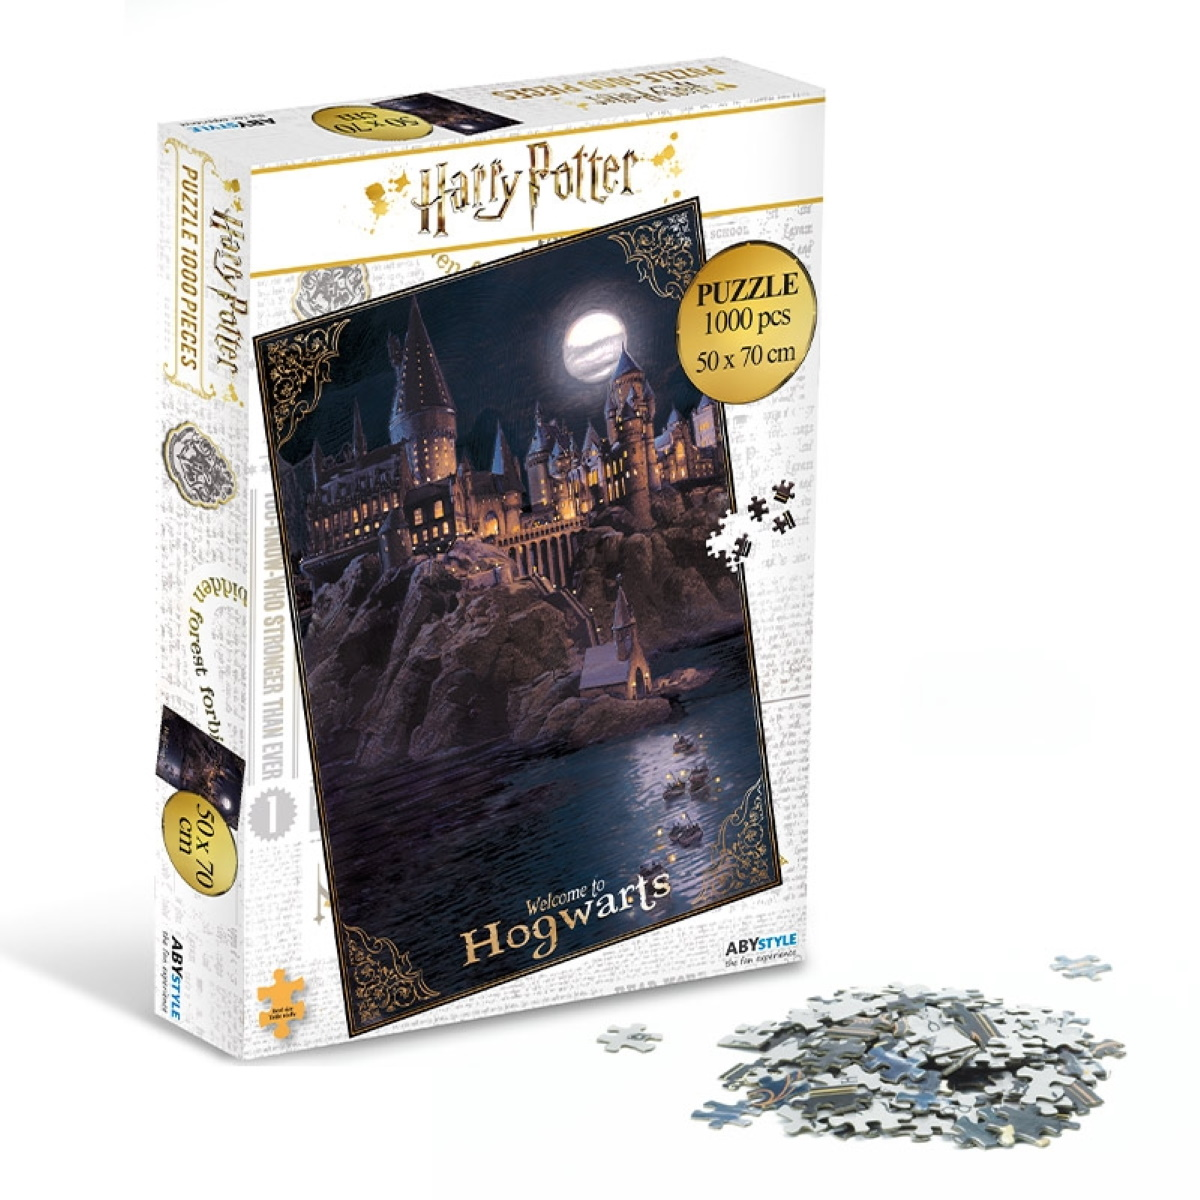 ABYSTYLE Hogwarts Schloss 1000 Puzzle Teile Puzzle